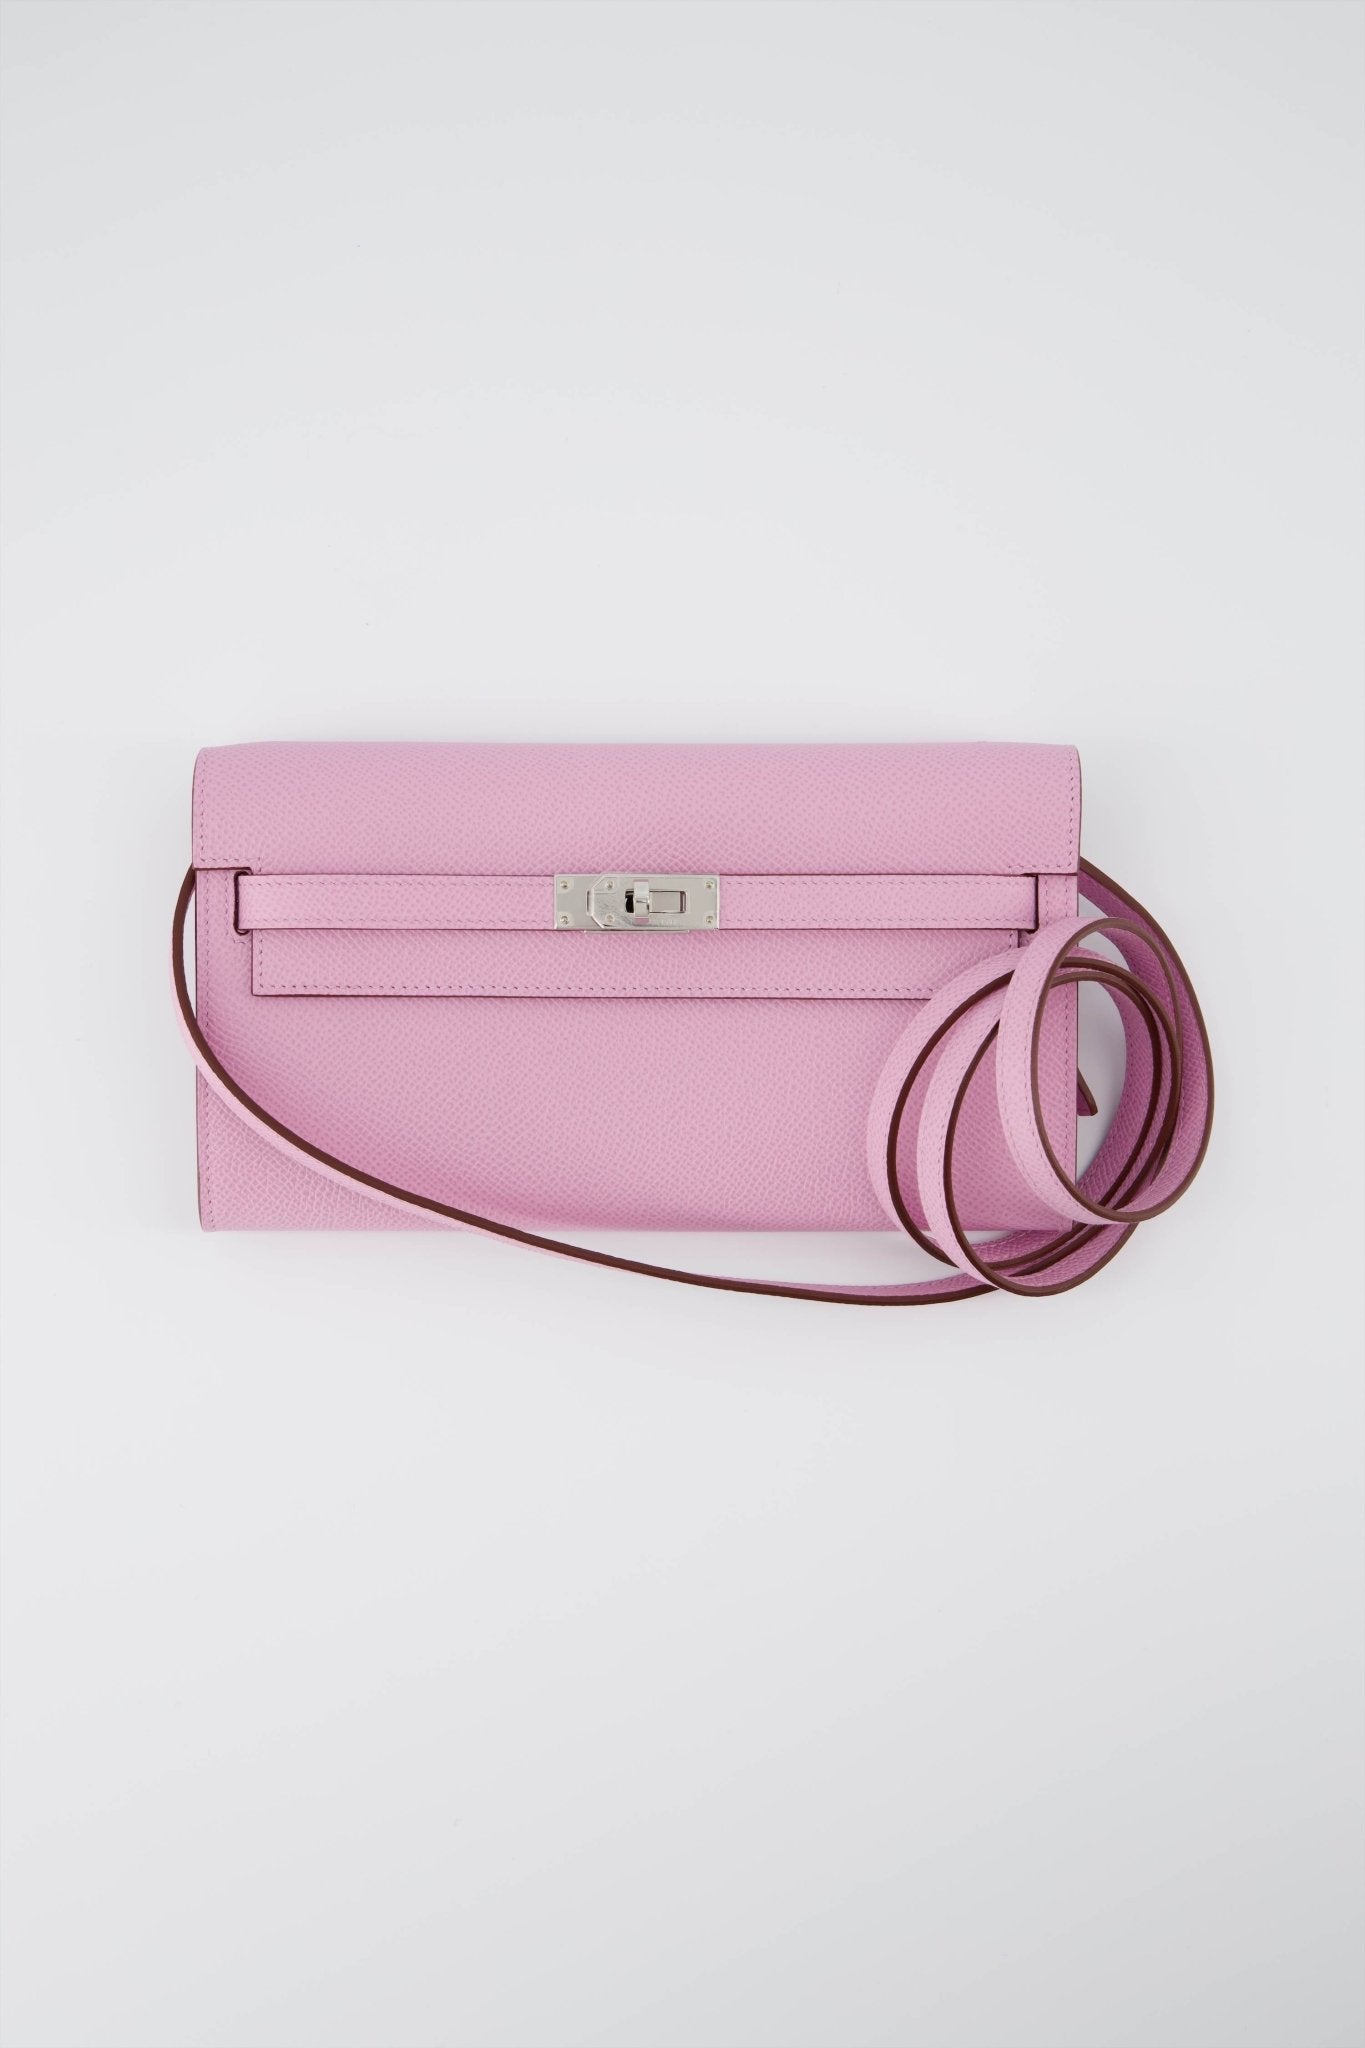 *Rare* Hermes Kelly Classique To Go Wallet Mauve Sylvestre Leather With Palladium Kelly Closure Hardware.  Removable Shoulder Strap, 4 Credit Card Slots And Zipped Change Purse